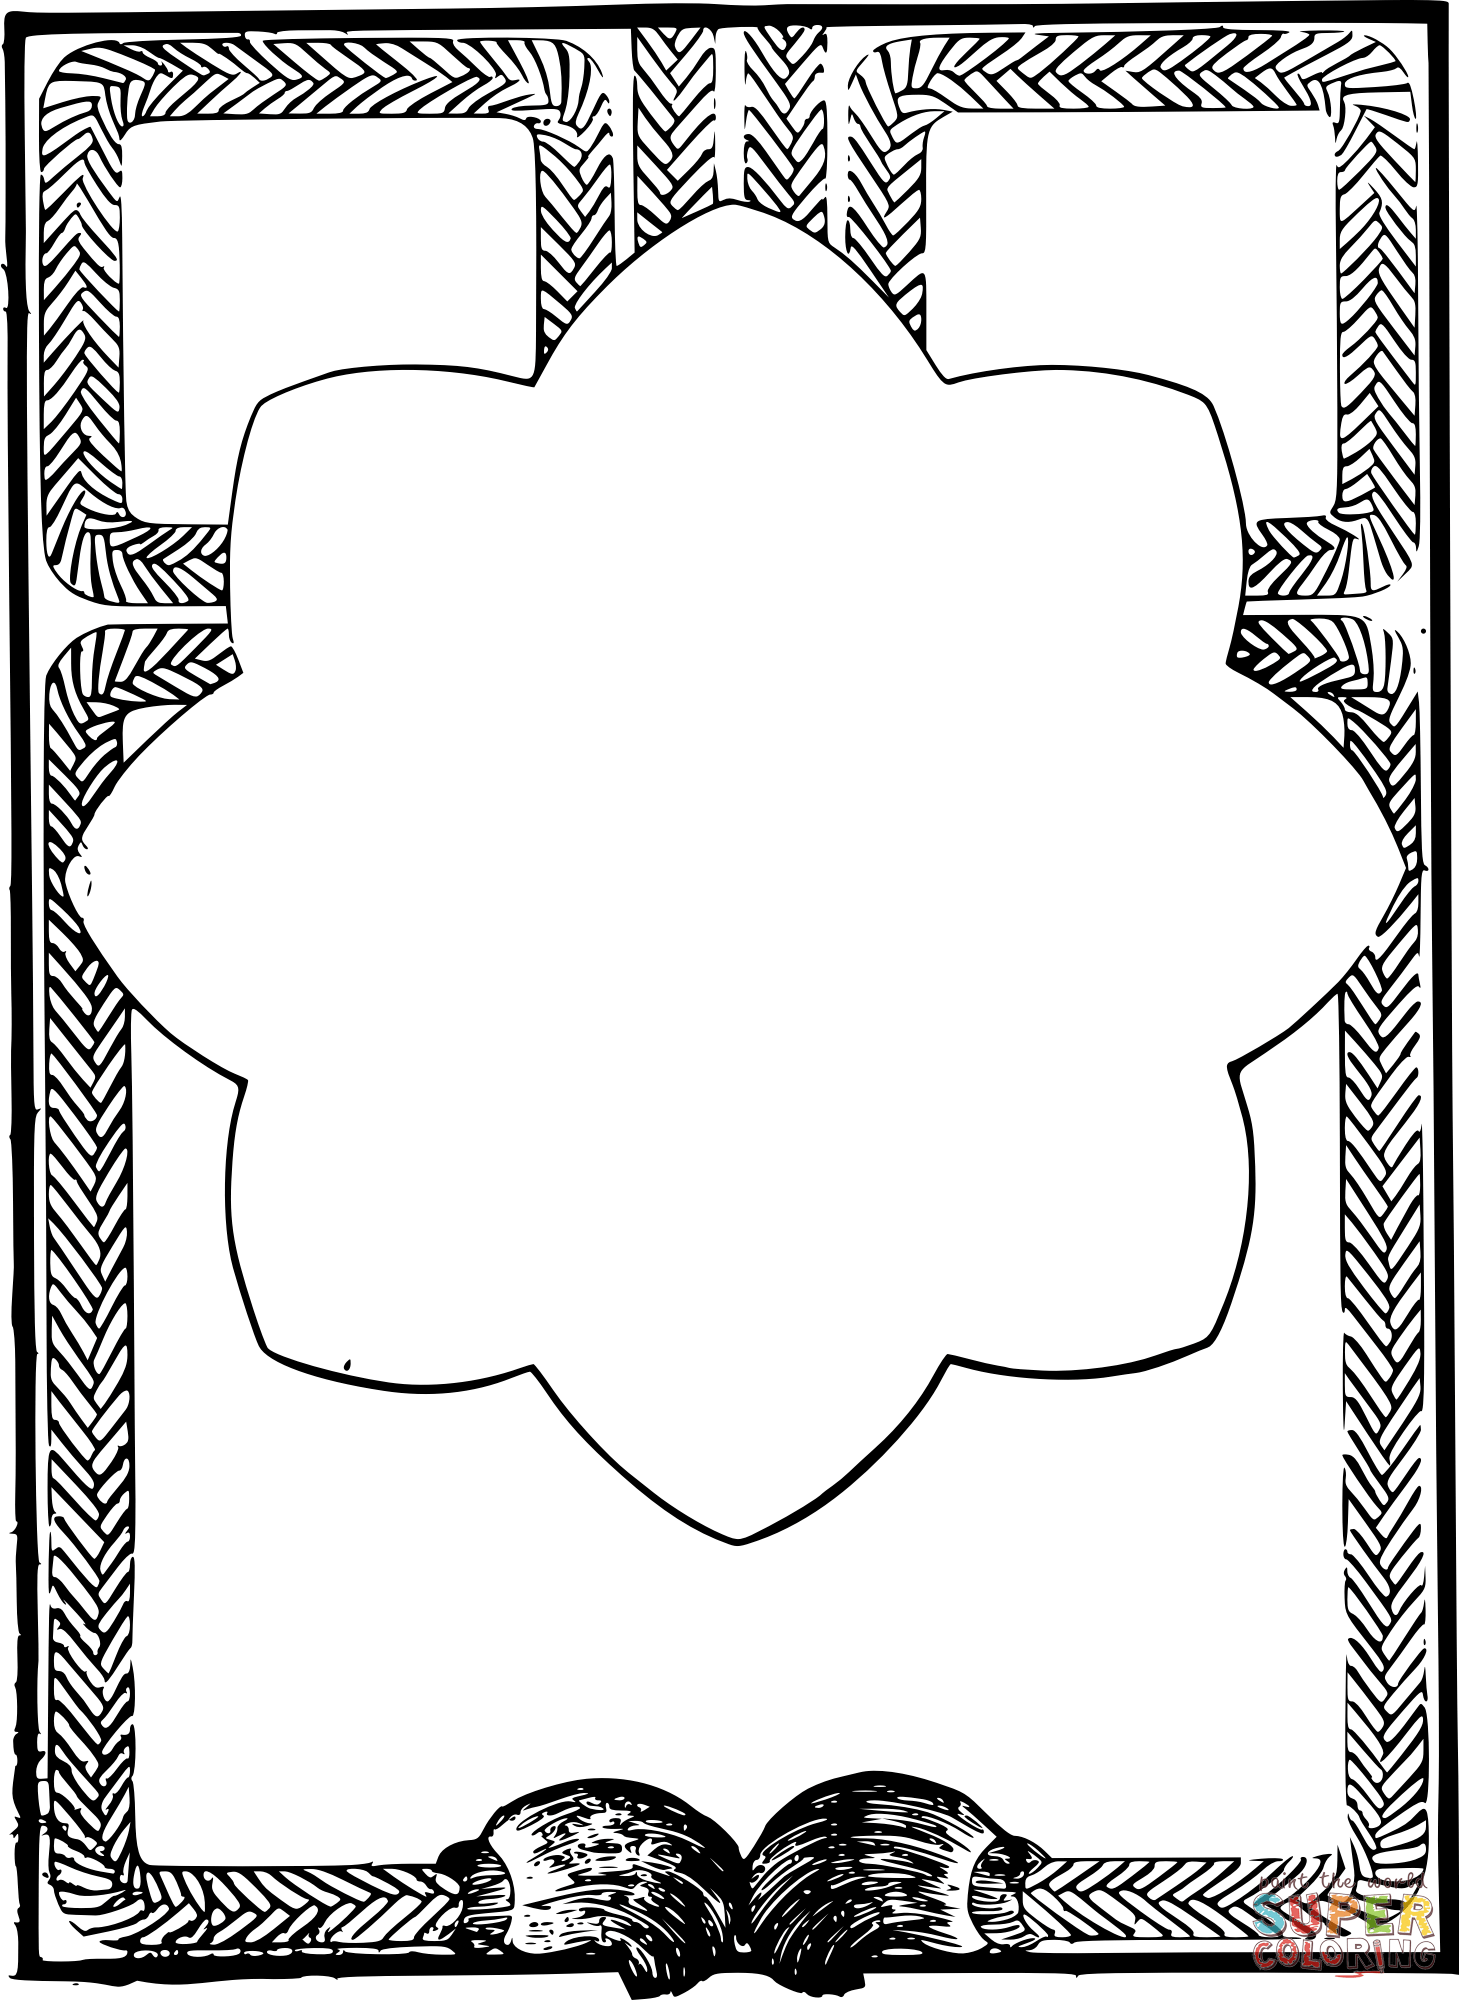 Vintage old asian frame coloring page free printable coloring pages